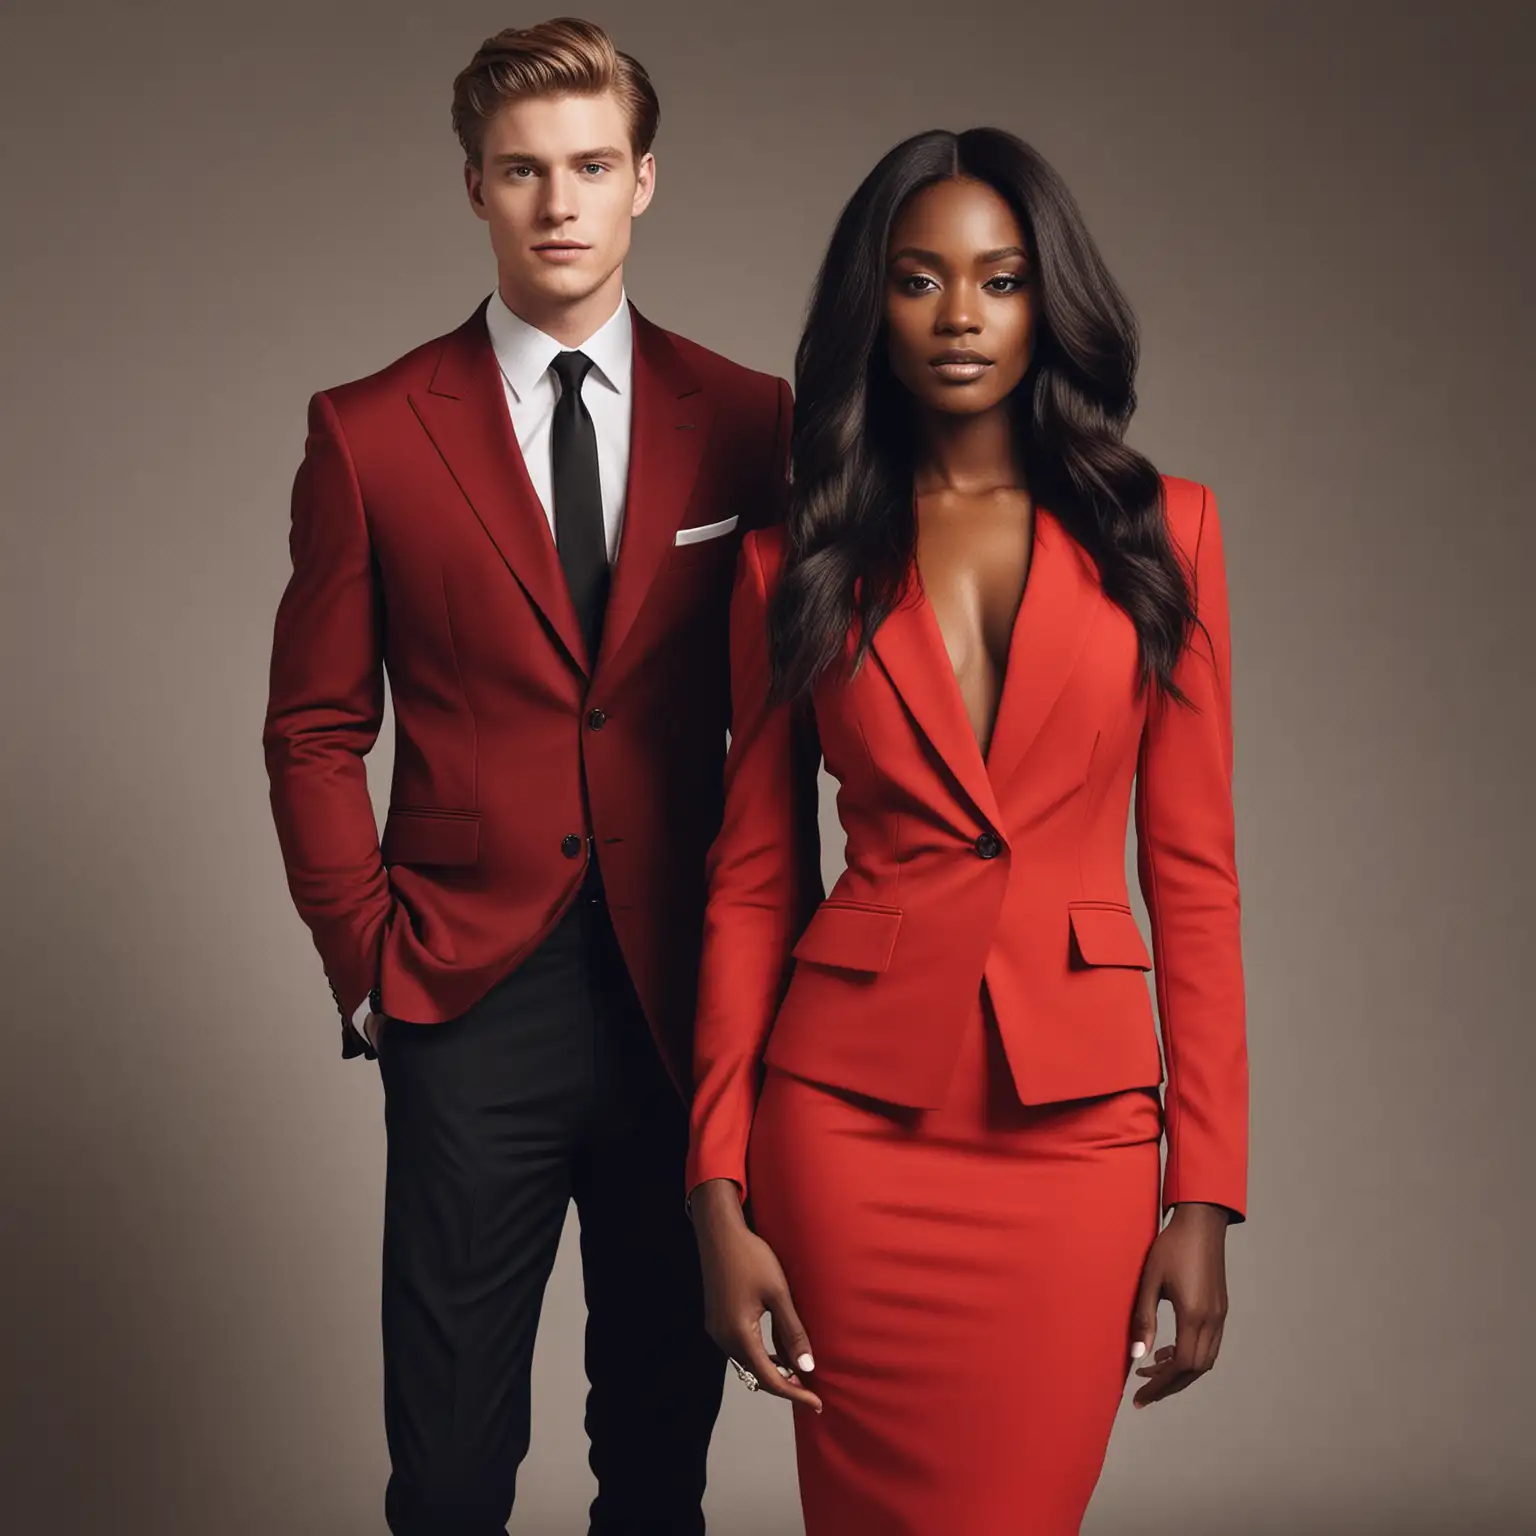 gorgeous, white male model in suit and stunning black woman model in a red dress, long hair






